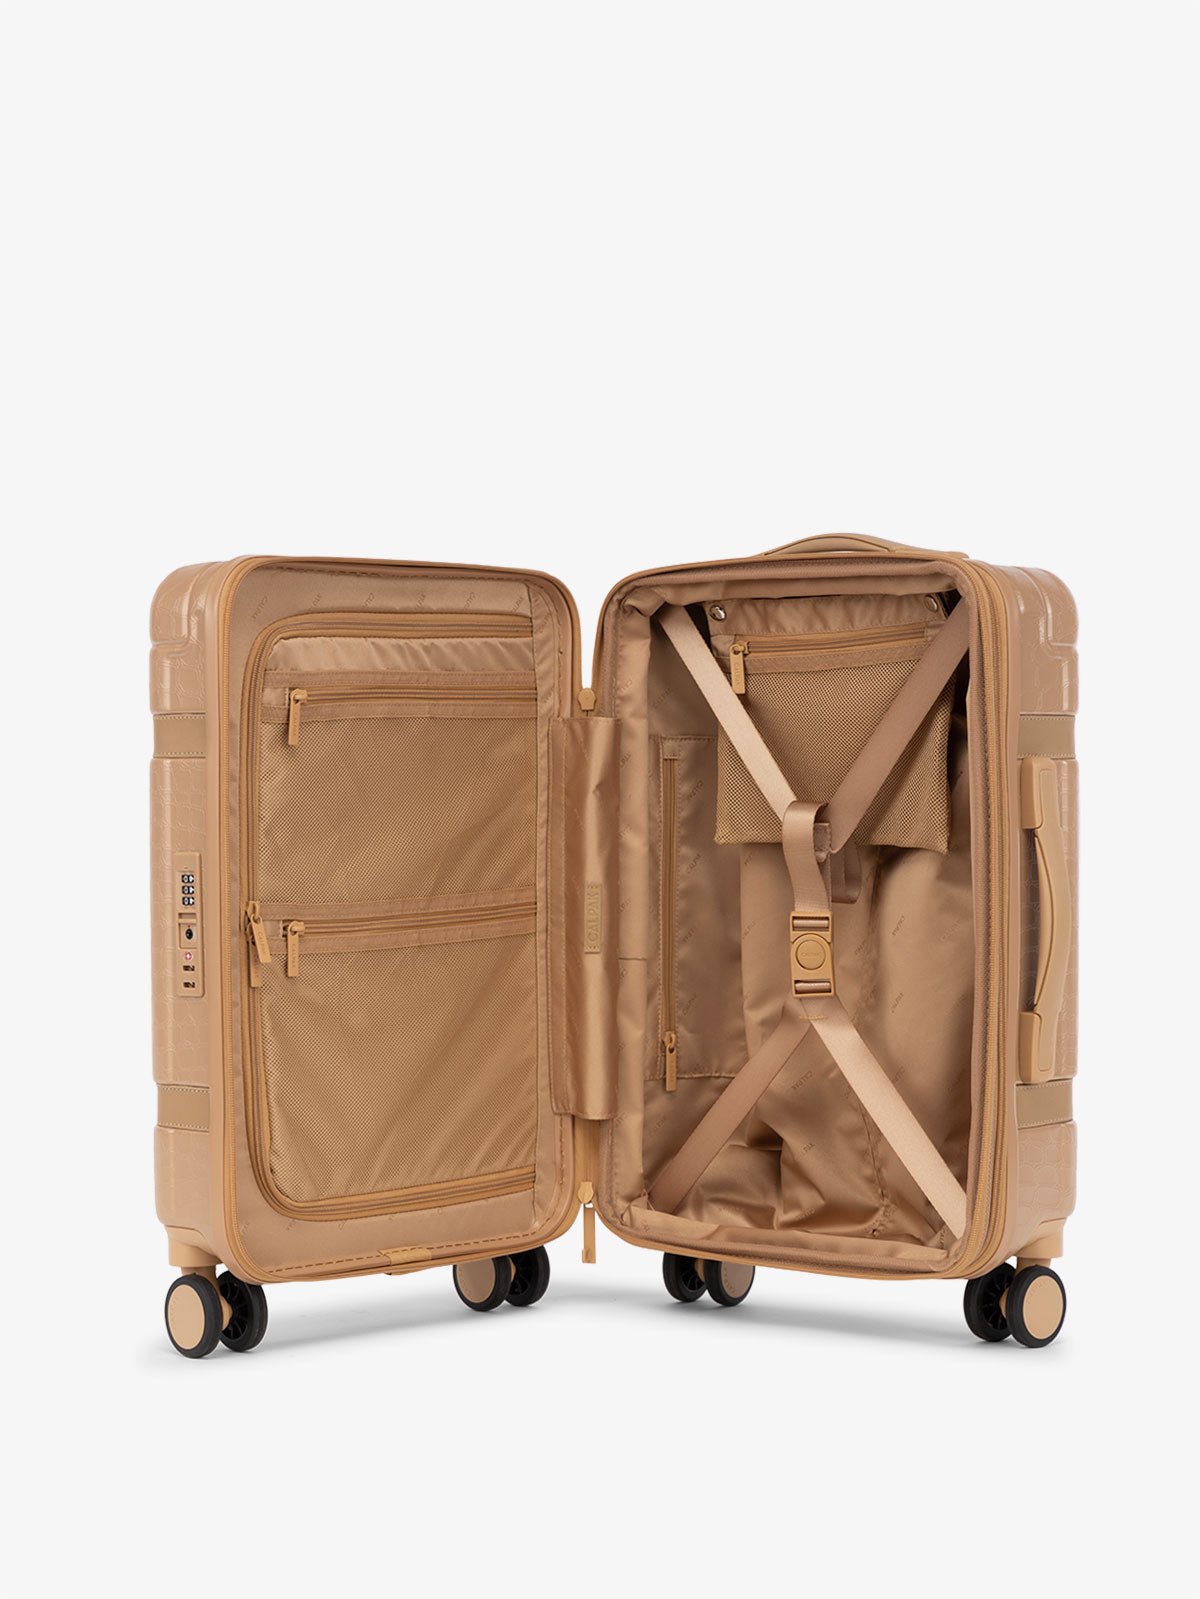 Trnk beige almond carry-on luggage with compression straps